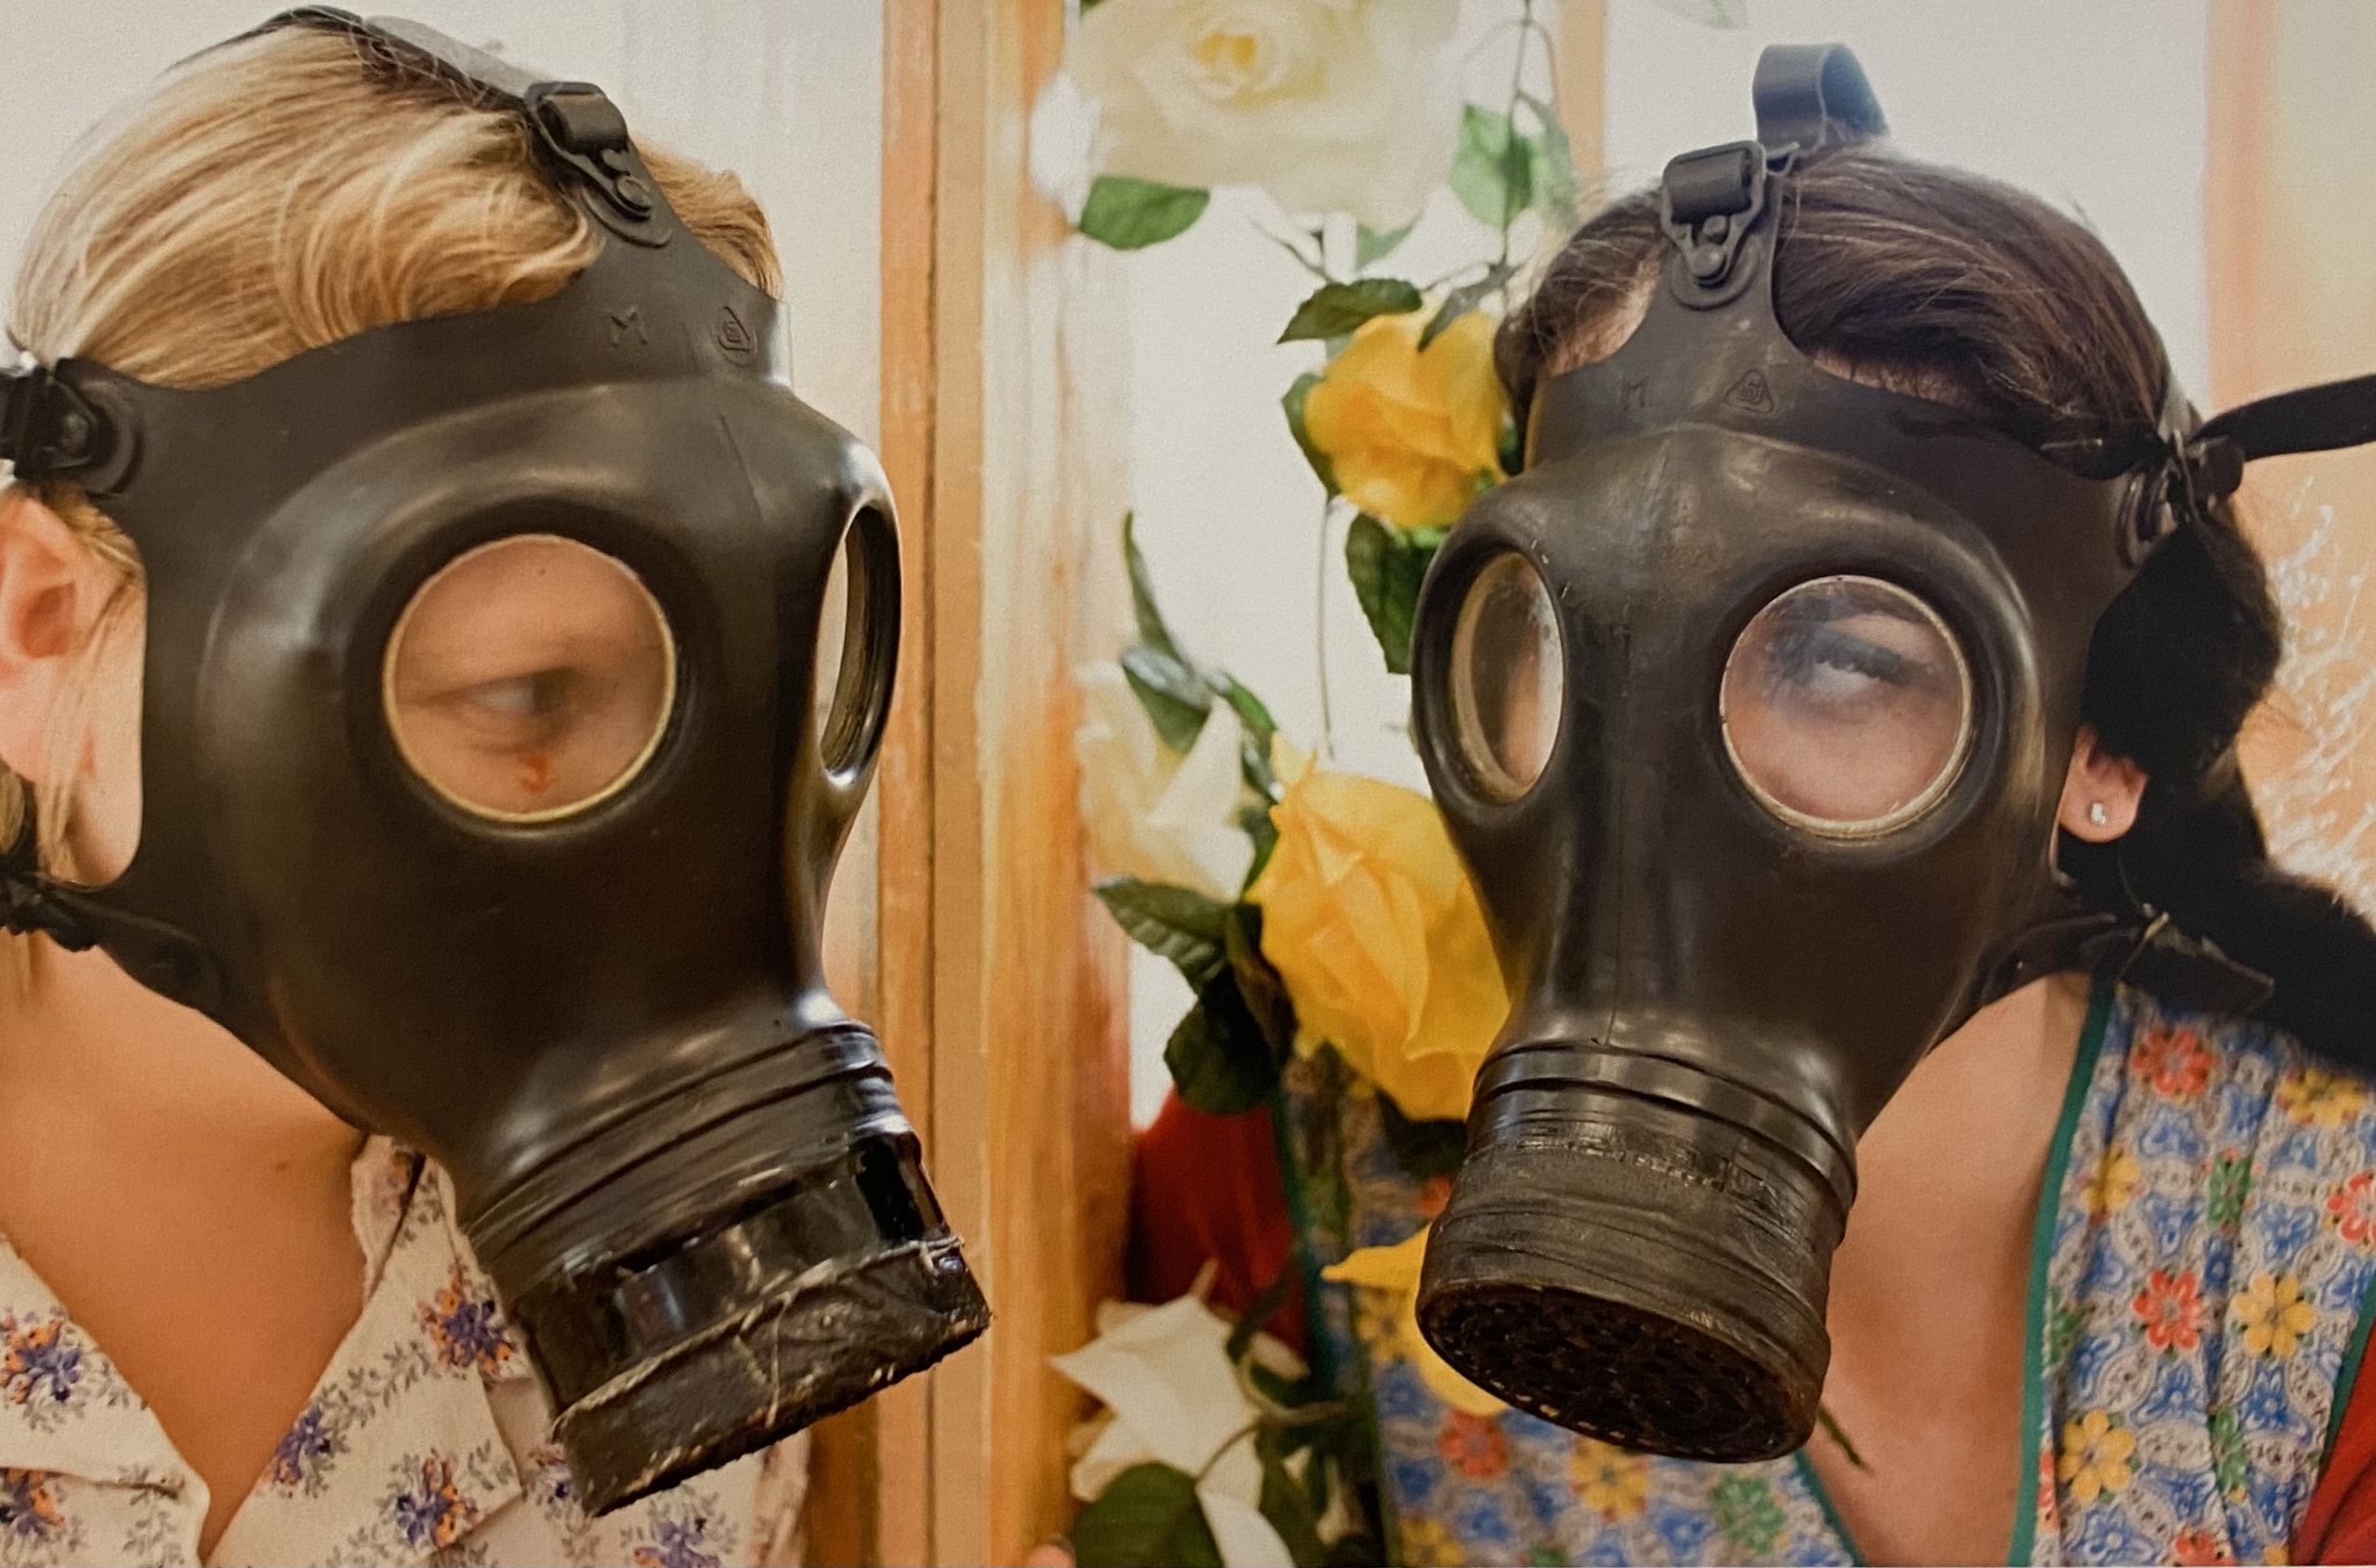 Two performers wearing gas masks.